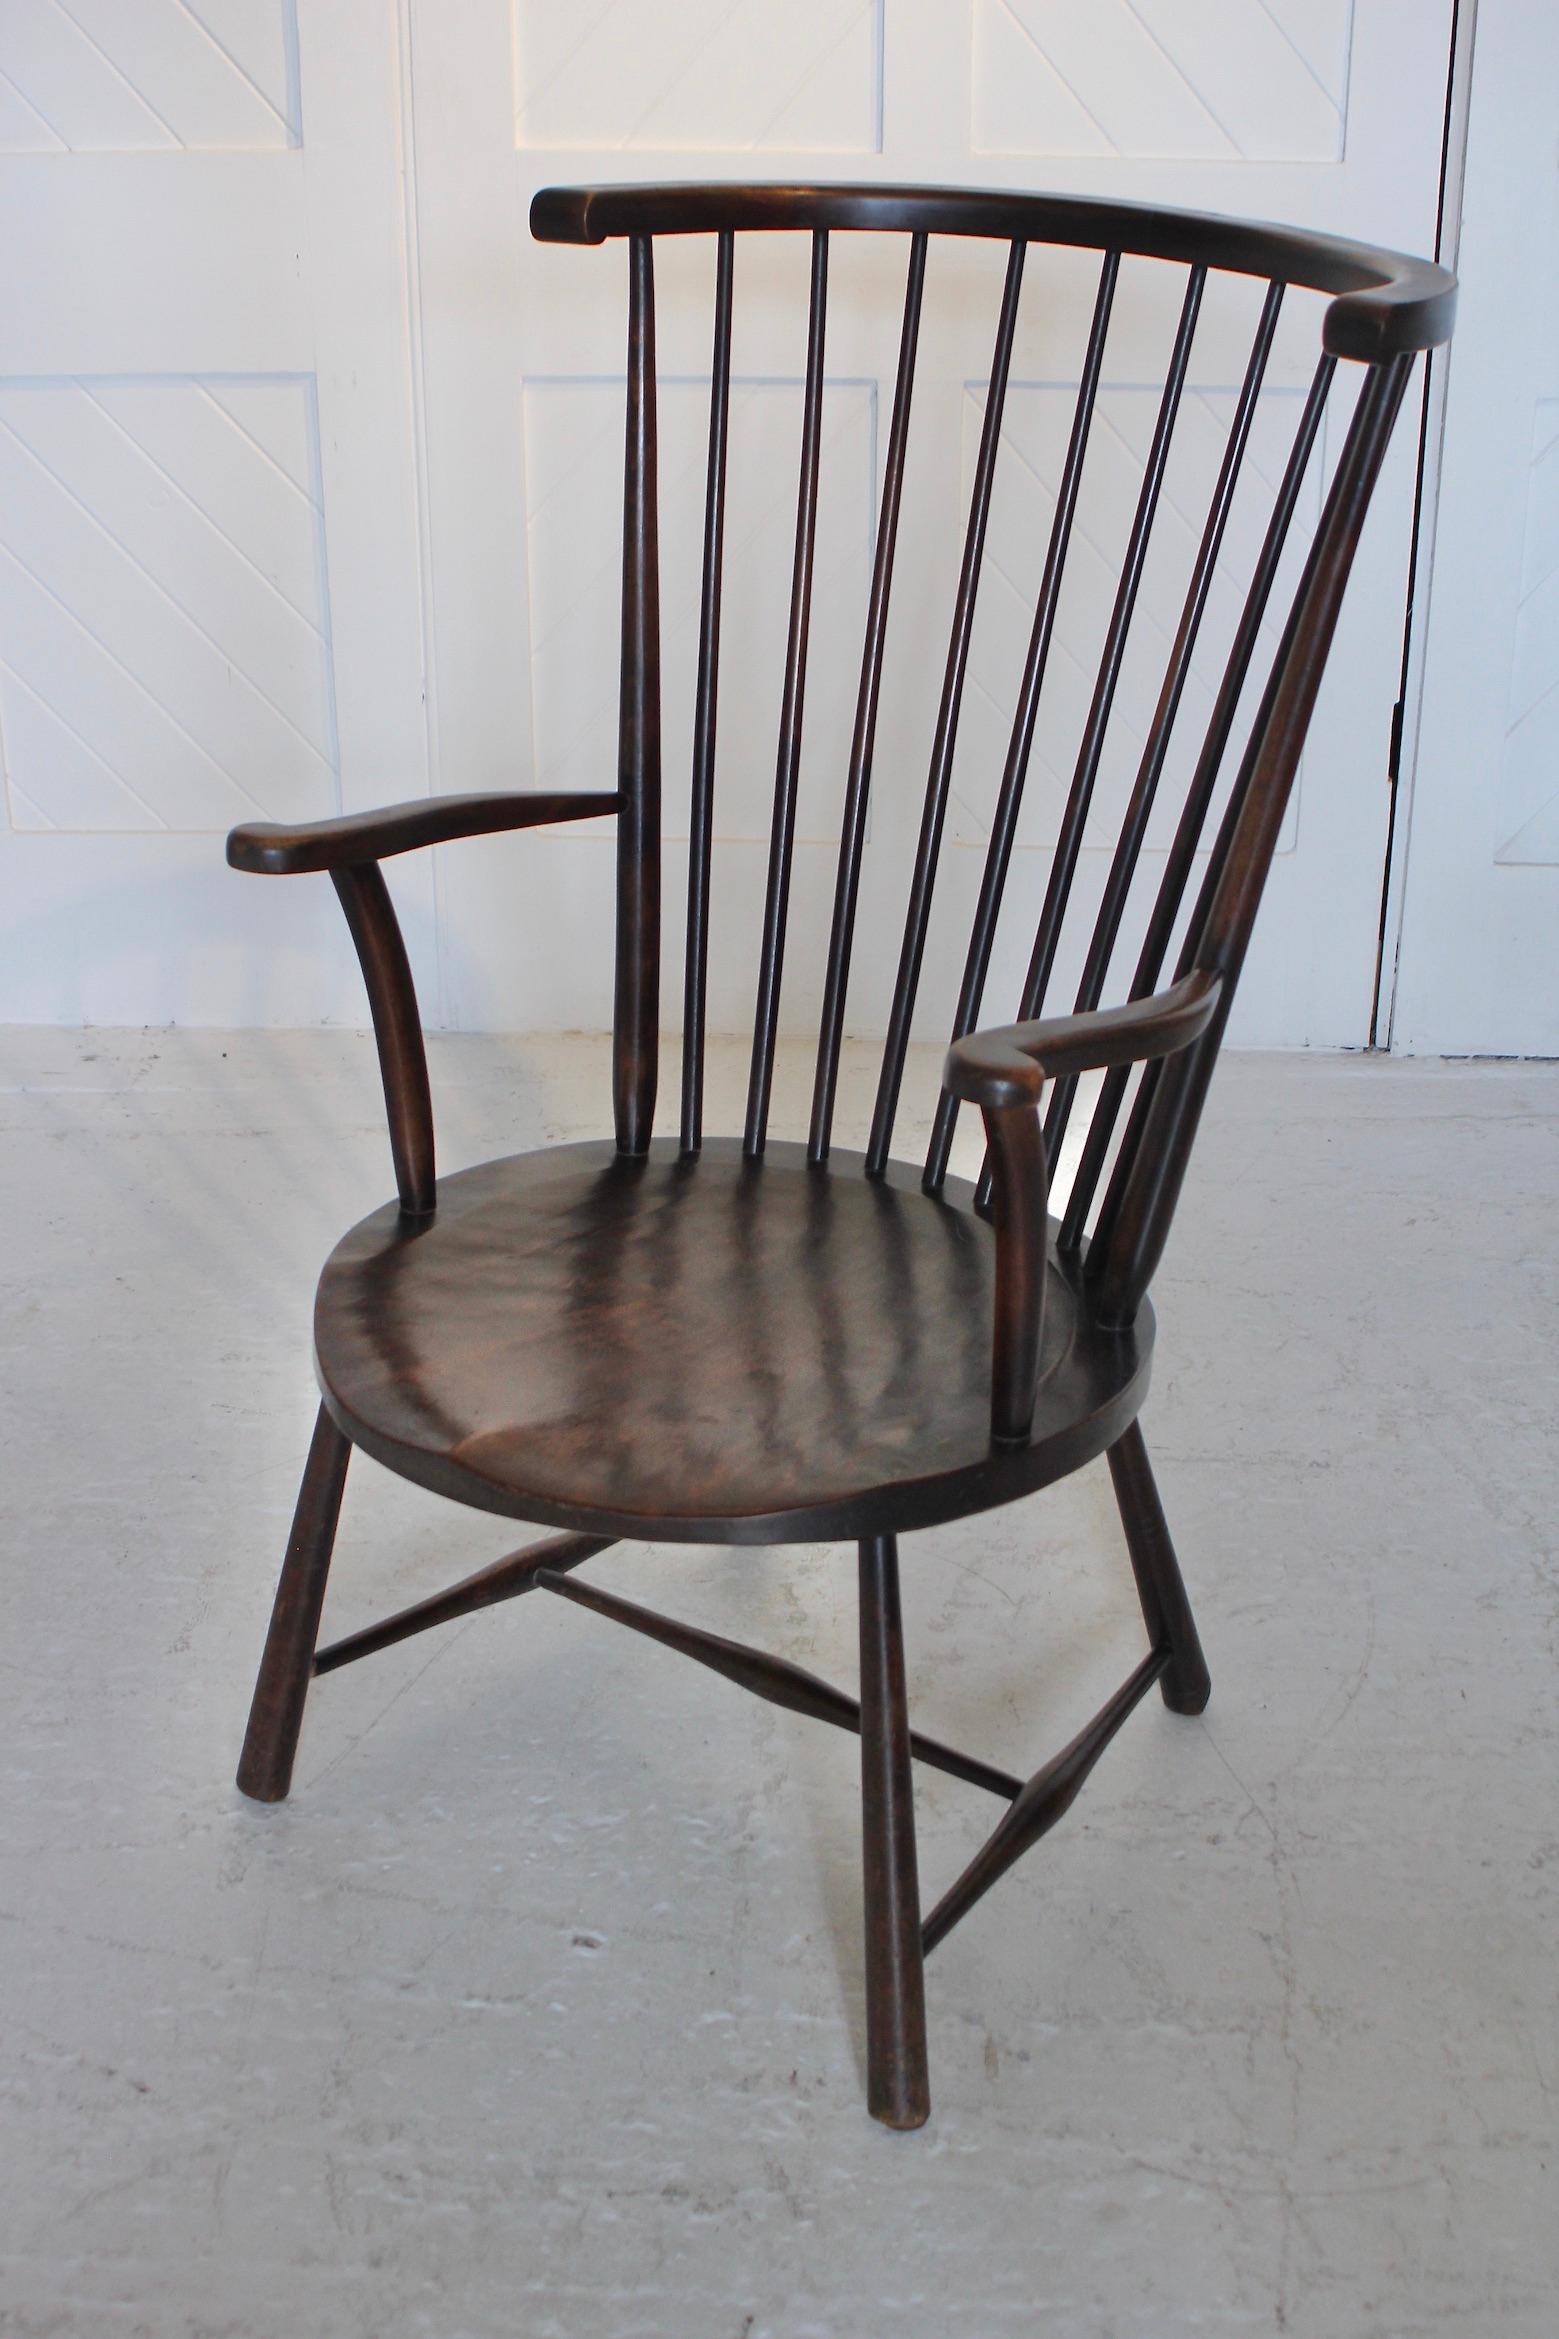 A fine example of a ‘Windsor’ style chair by Liberty & Co. 
Stylish tall stick-back design. 
This beech armchair dates from around 1875.